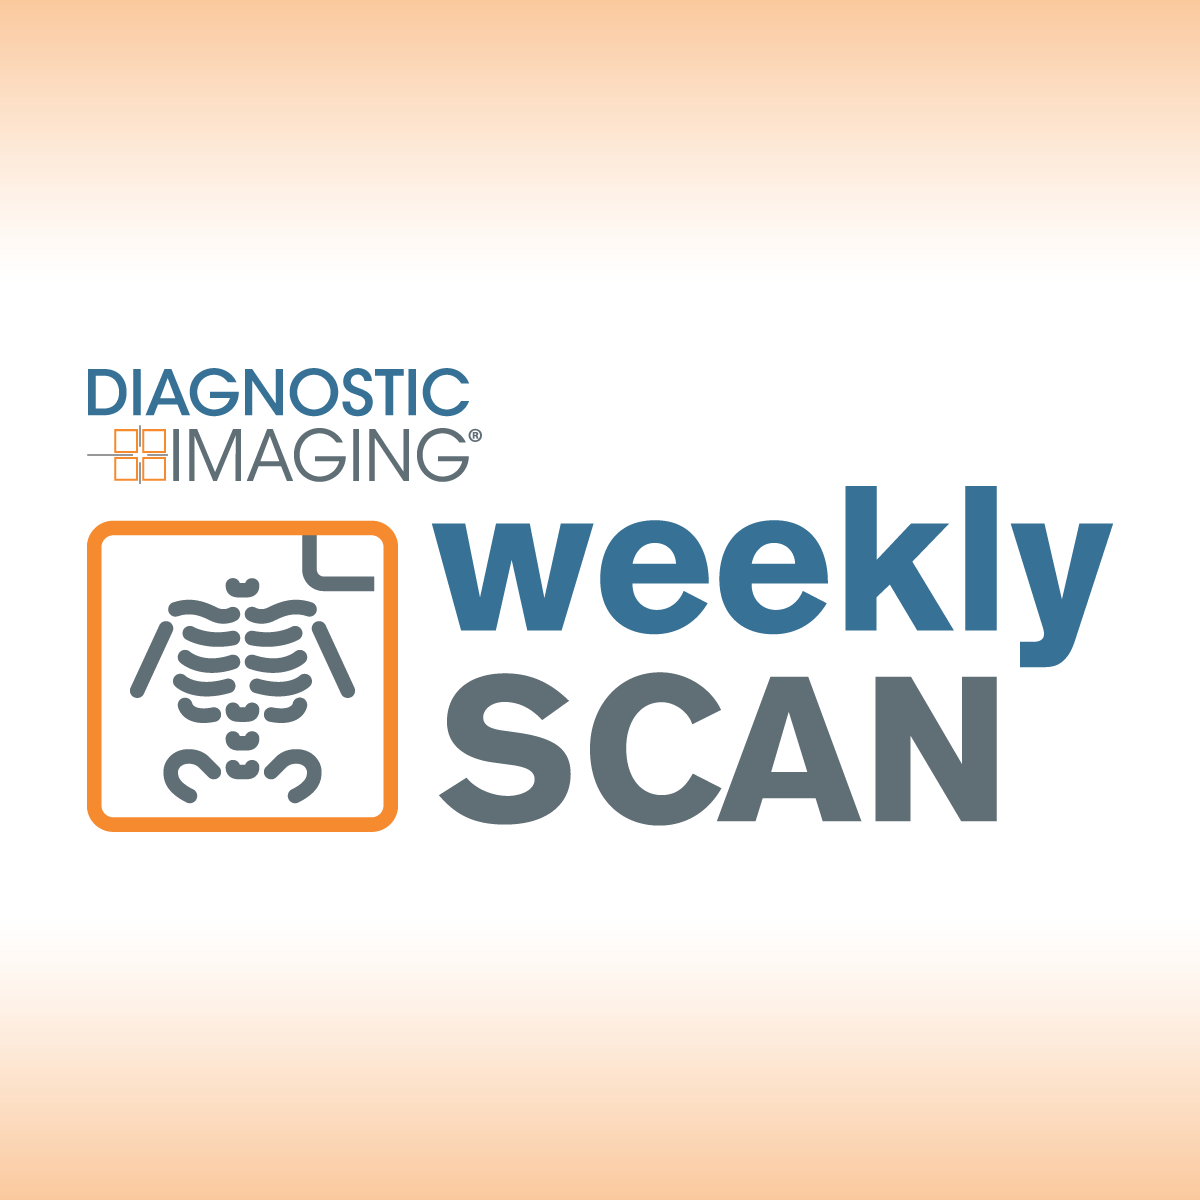 Diagnostic Imaging's Weekly Scan: June 25-July 1